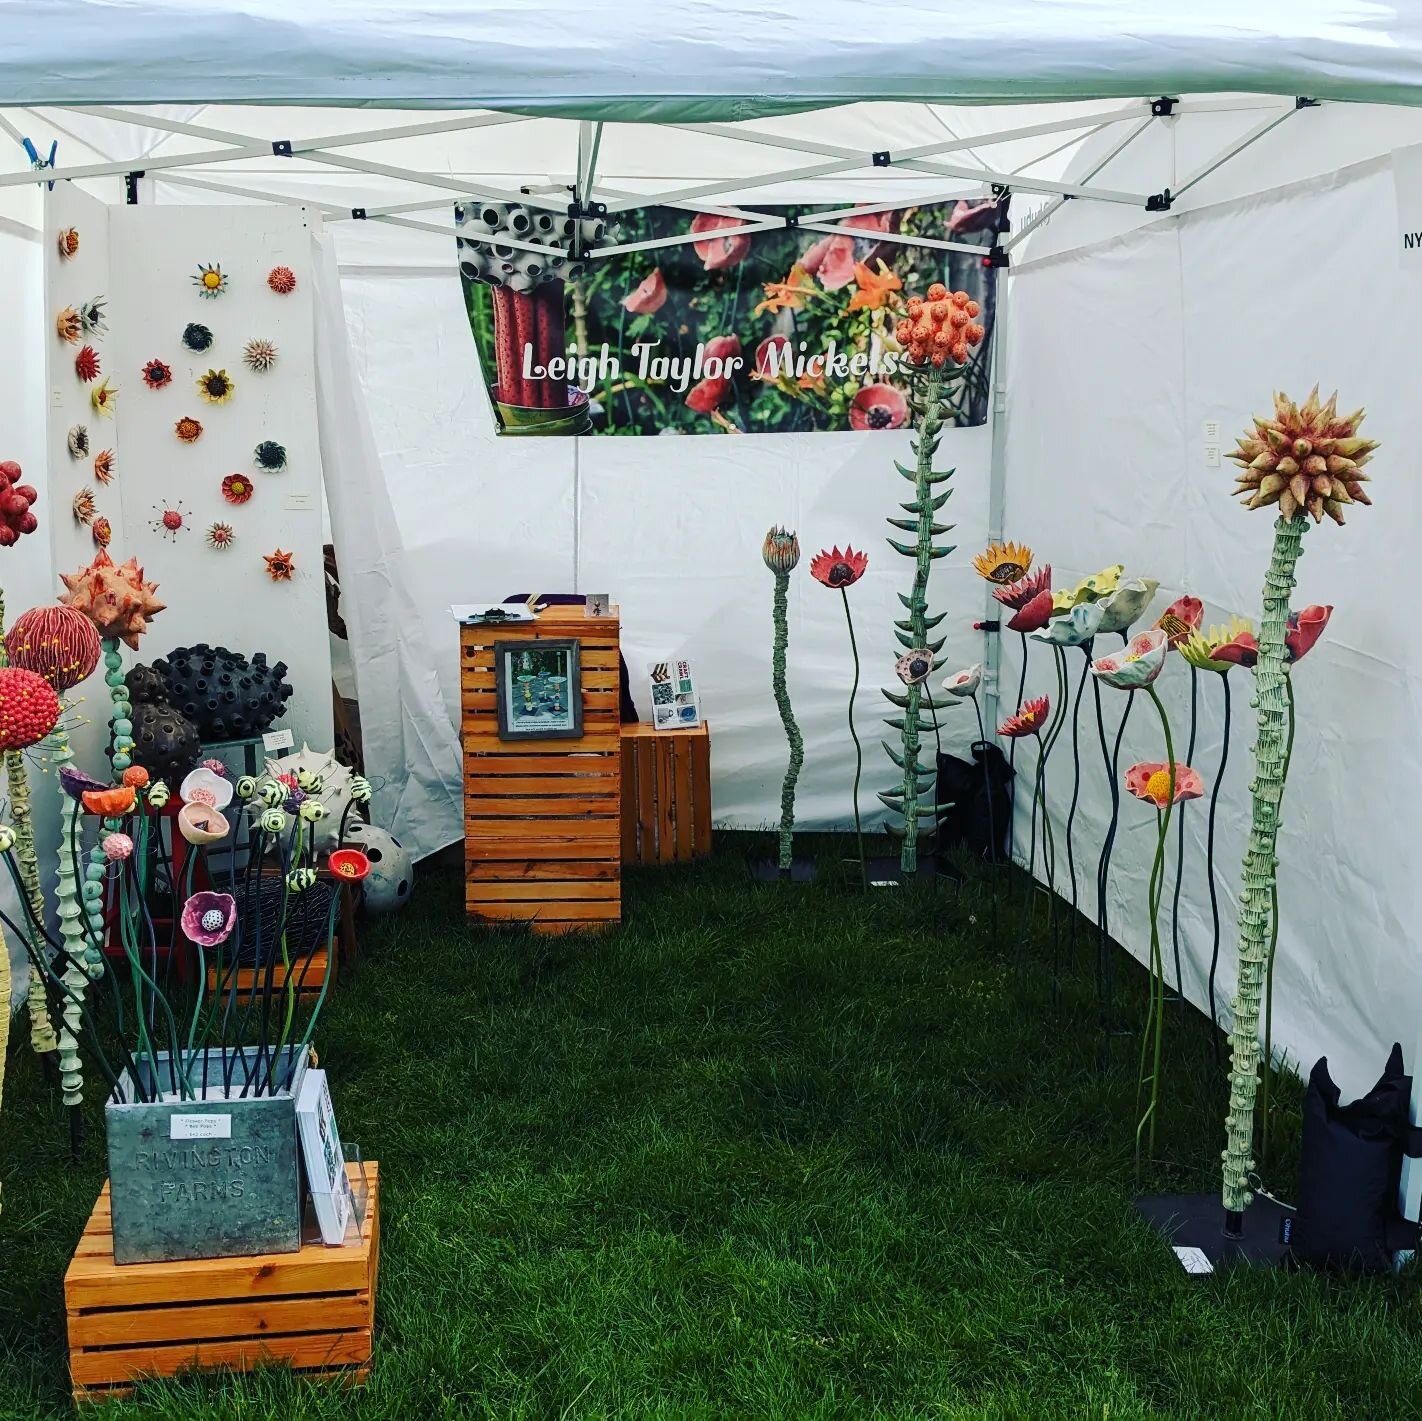 Doors open at 10! Come visit my booth (P2) at Crafts at Lyndhurst and check out what I have for your garden and home.

#hudsonvalleyartist #porcelain #outdoorsculpture #gardenpoppies #gardenart #gardendwellers #seeds #flowers #foreverflowers